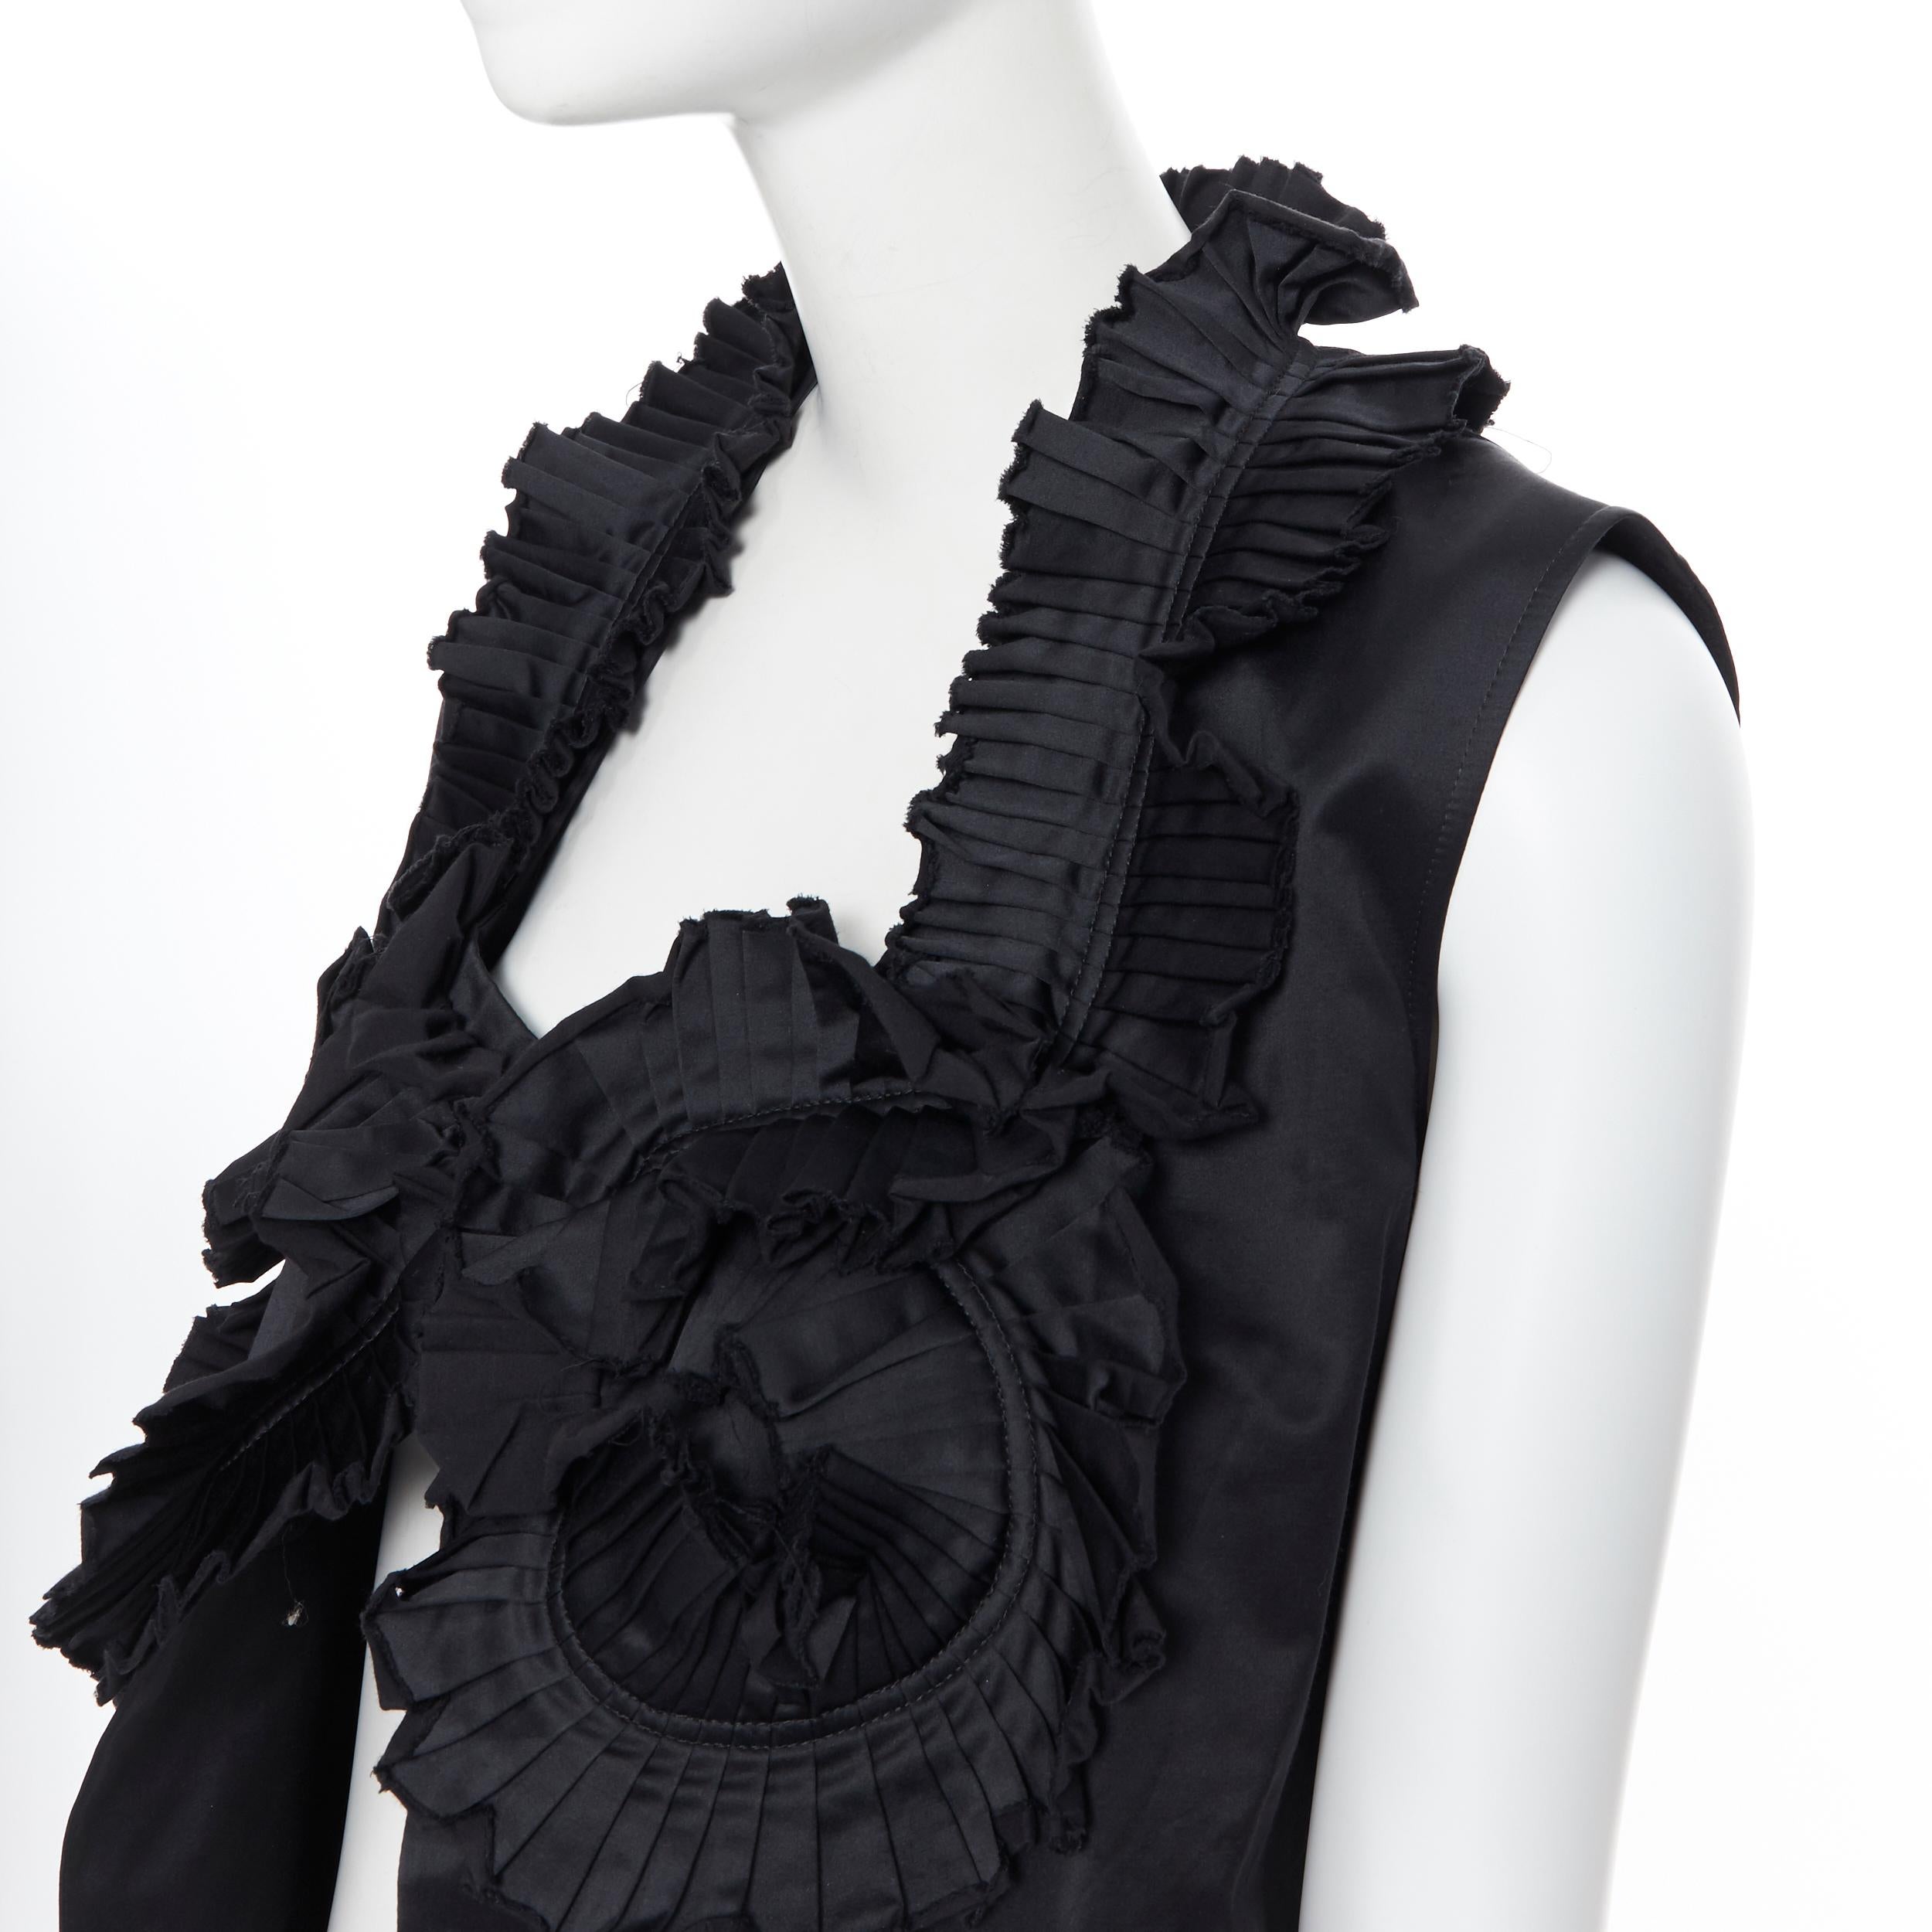 runway YVES SAINT LAURENT SS10 black pleated ruffle floral collar boxy vest FR36
Brand: Yves Saint Laurent
Designer: Stefano Pilati
Collection: SS10 - Look 3 in Black
As seen on: Frida Gustavsson
Model Name / Style: Vest
Material: Cotton